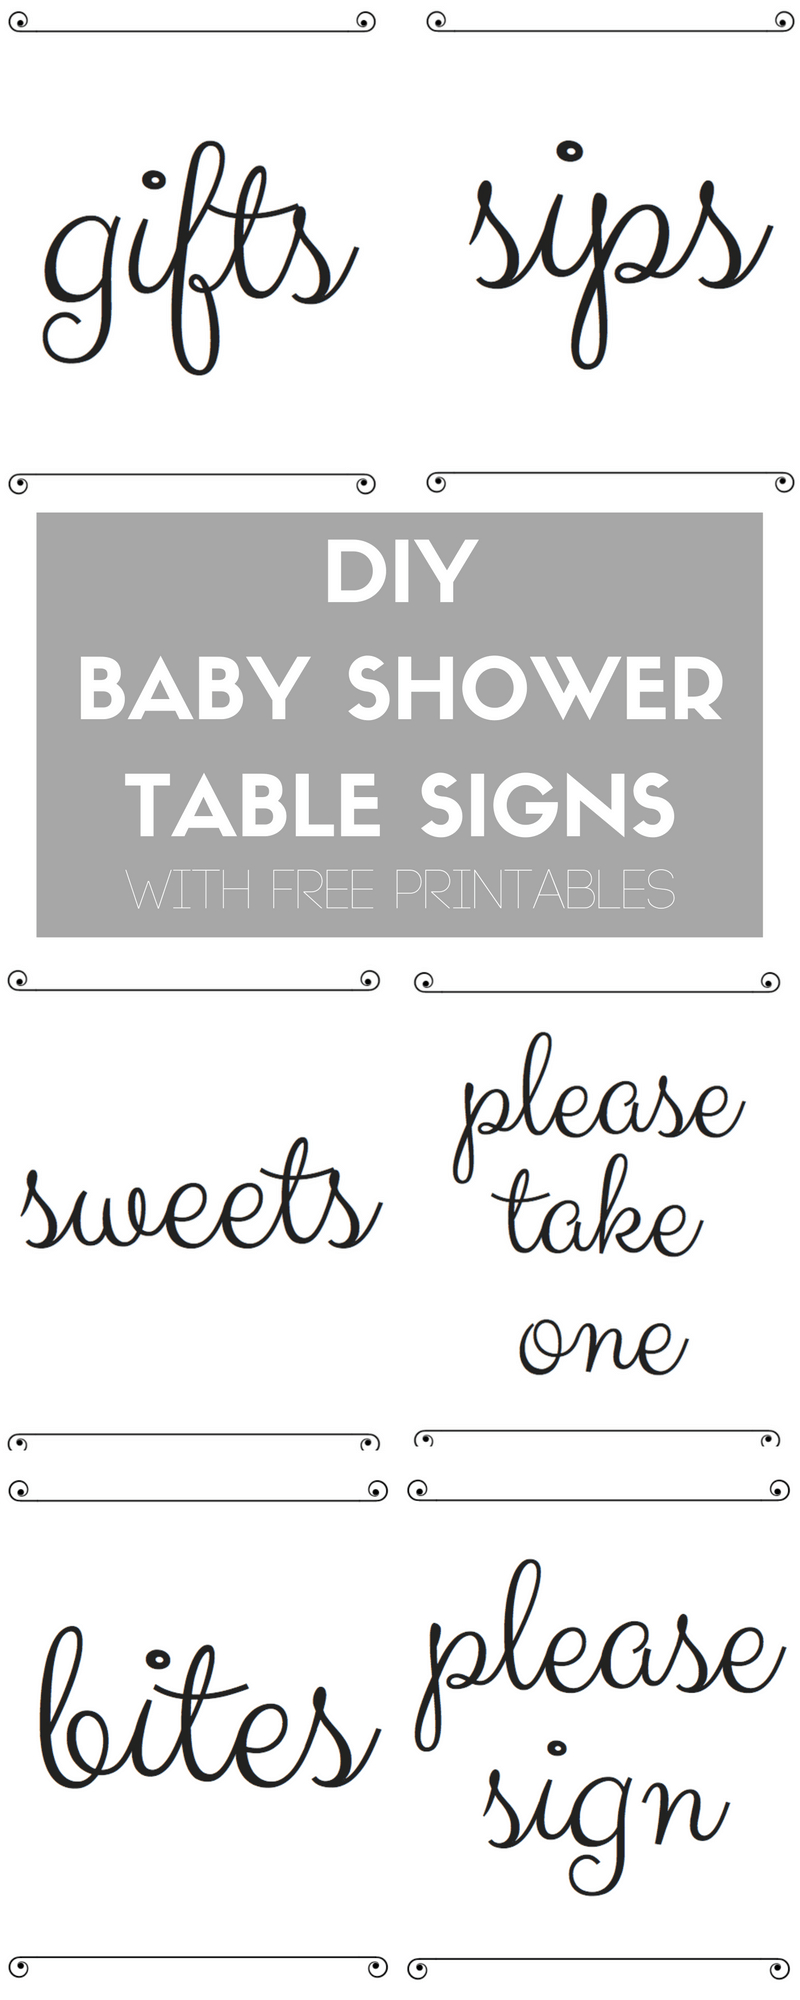 Diy Baby Shower Table Signs With Free Printables | Best Of The Blog - Free Printable Testing Signs